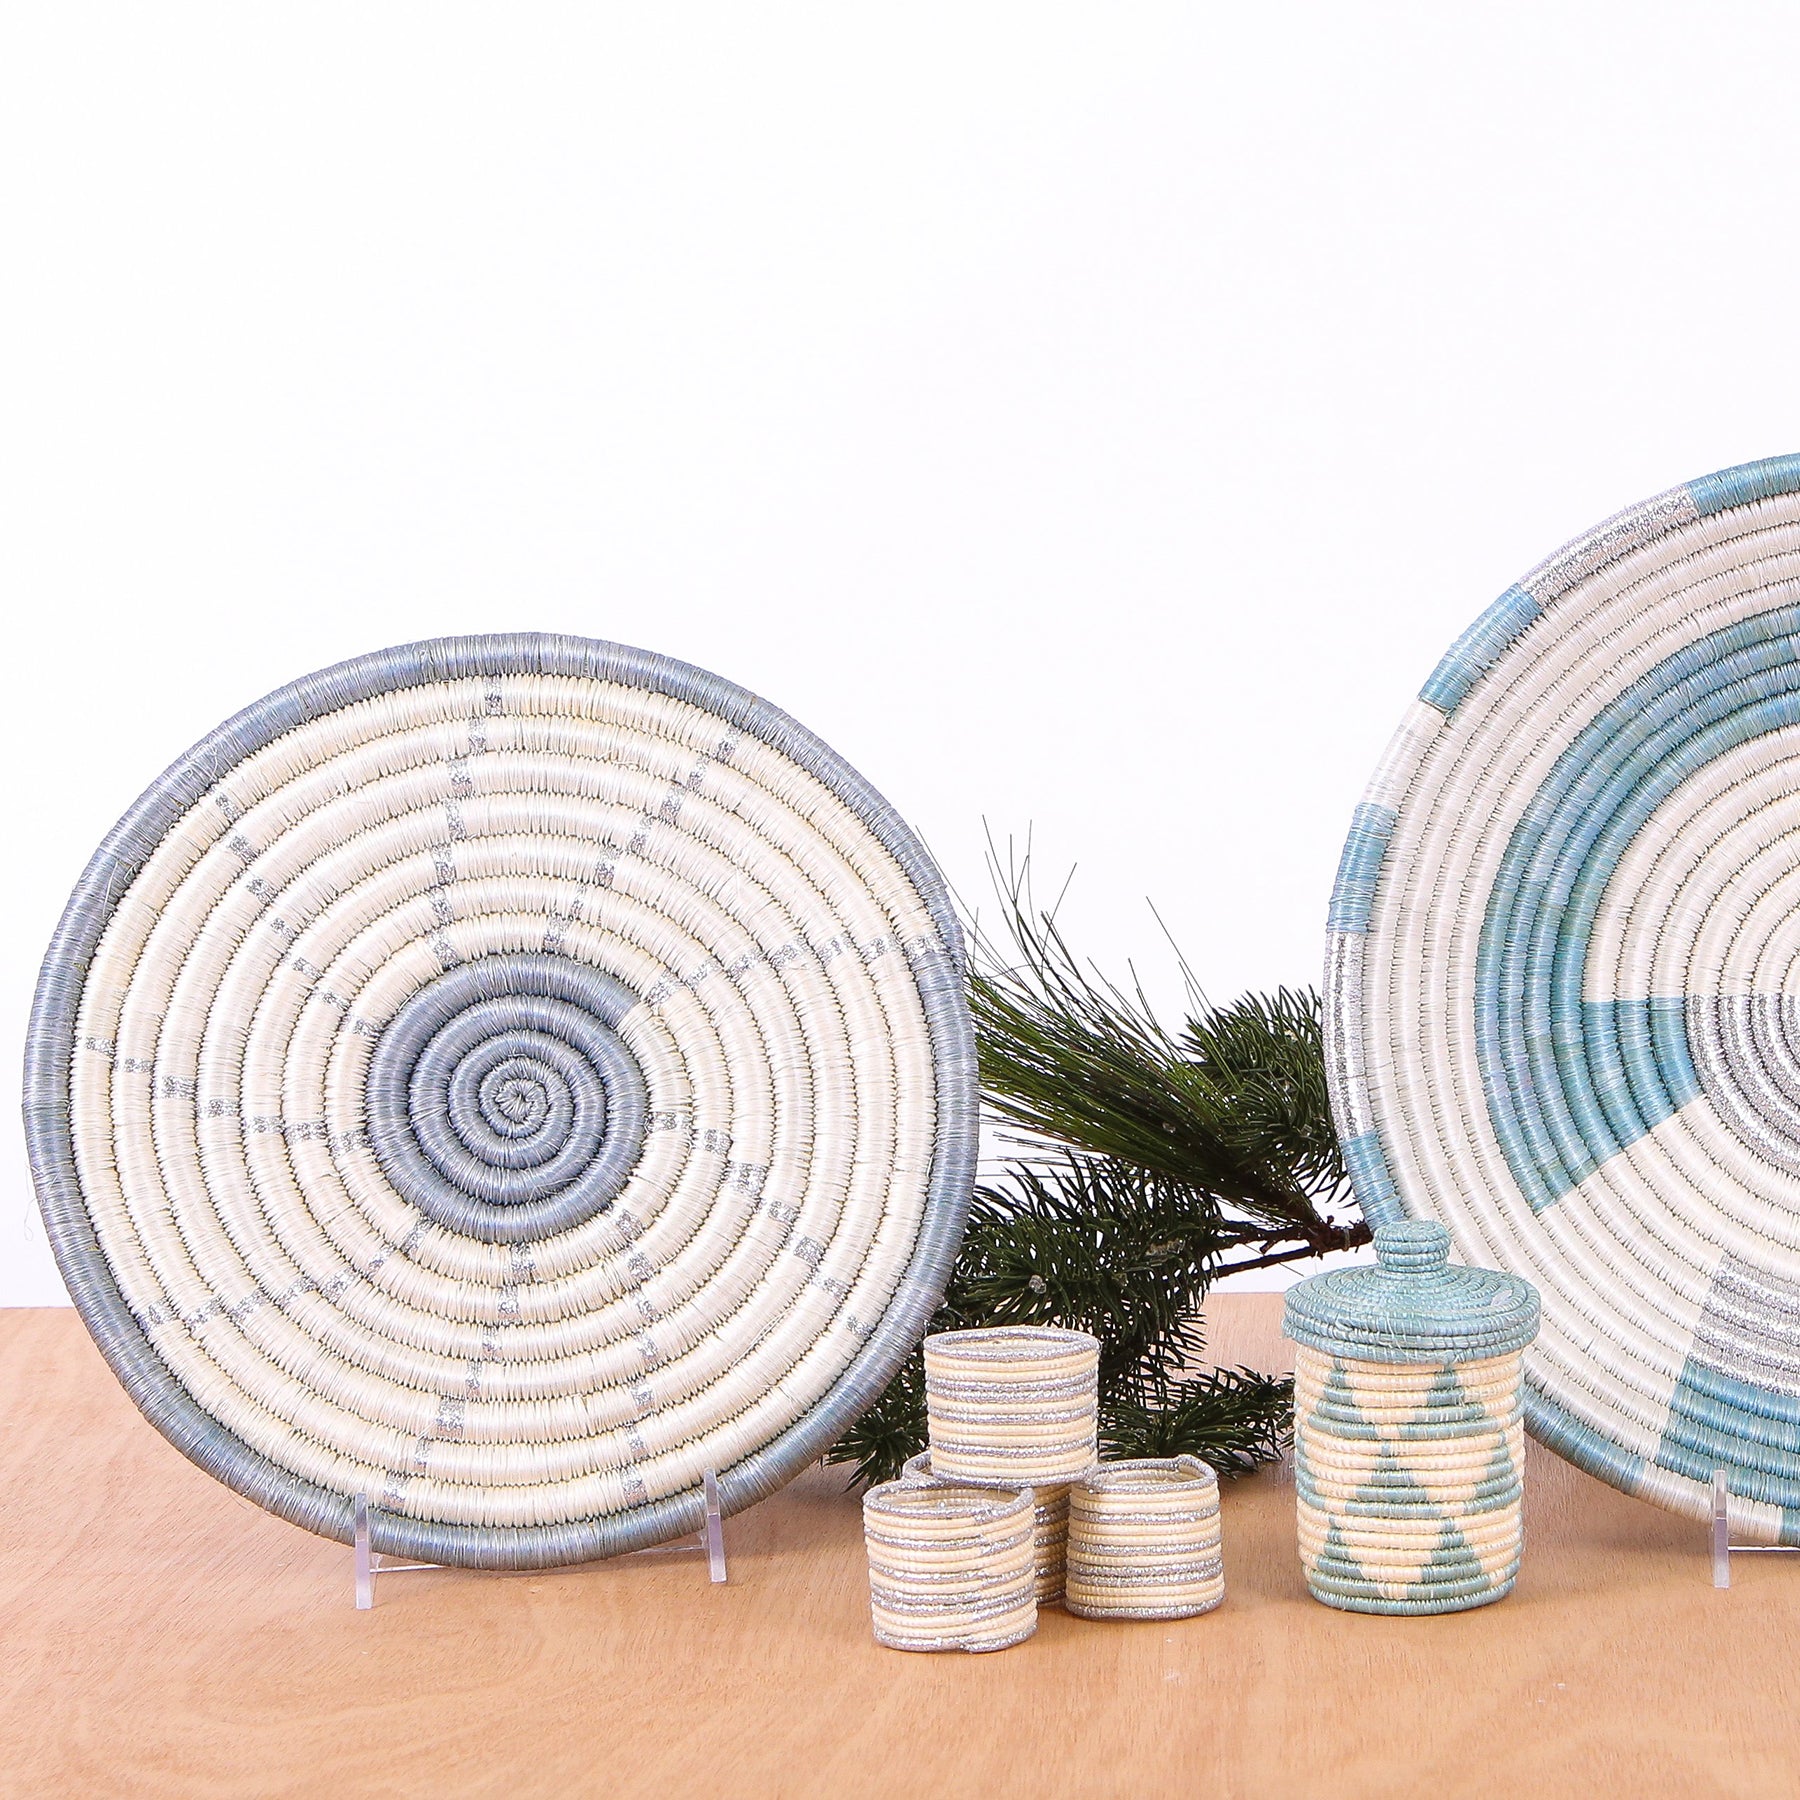  Holiday Table Plate - 10" Metallic Spiral by Kazi Goods - Wholesale Kazi Goods - Wholesale Perfumarie